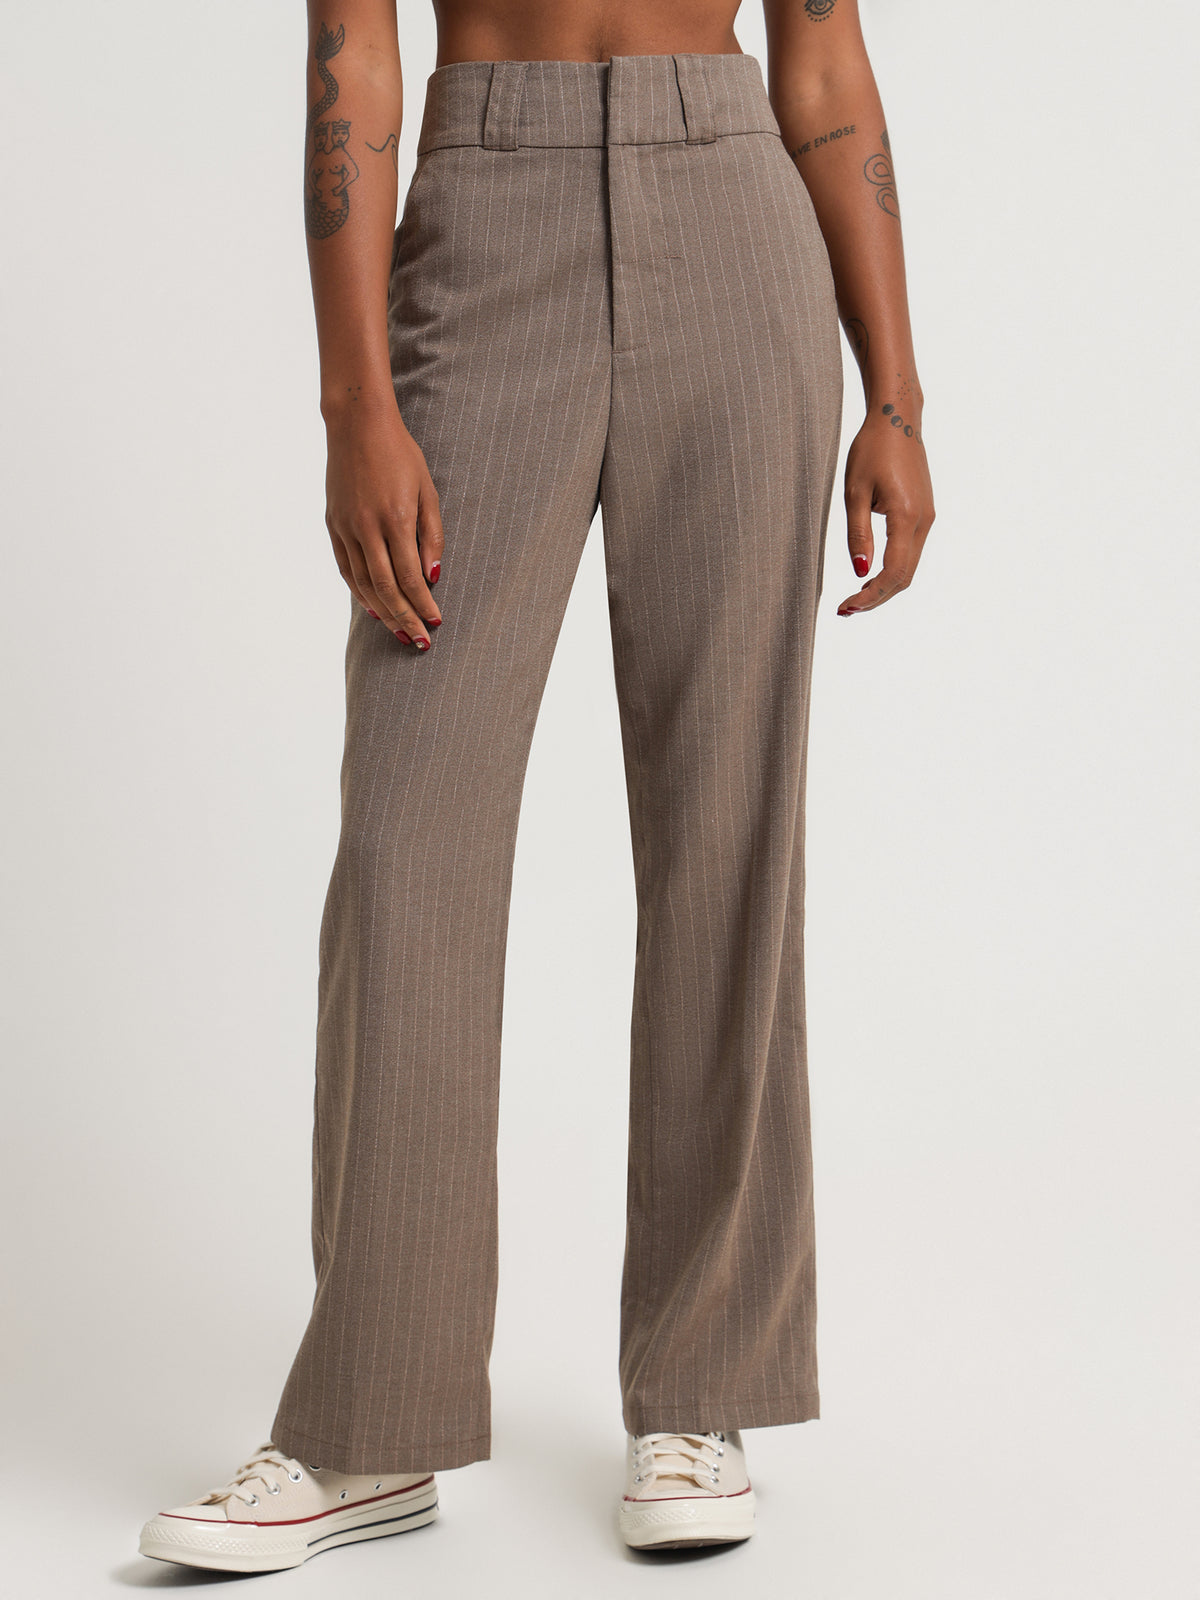 Danny Pinstripe Pants in Taupe